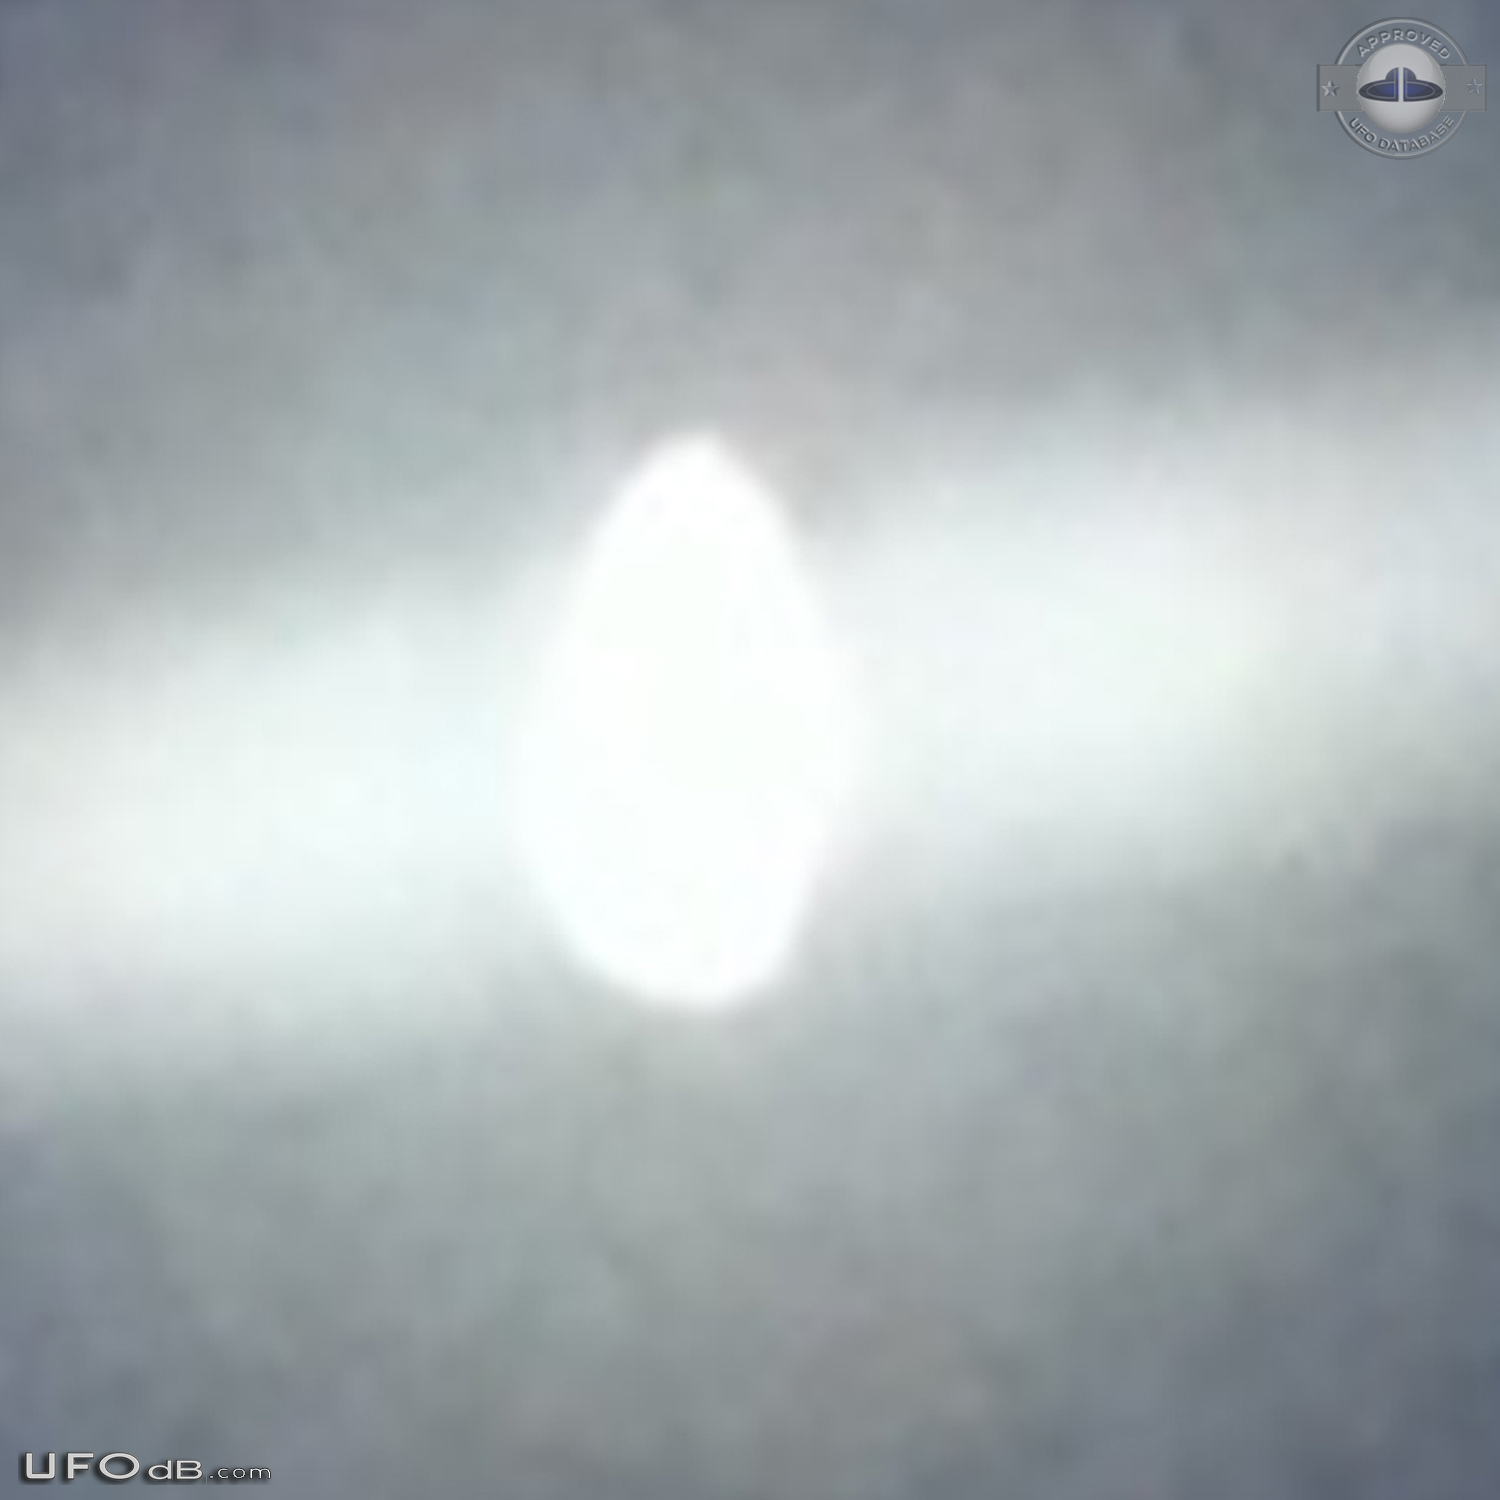 Bright Glowing Egg Shaped UFO over Bay of Plenty New Zealand 2012 UFO Picture #692-3